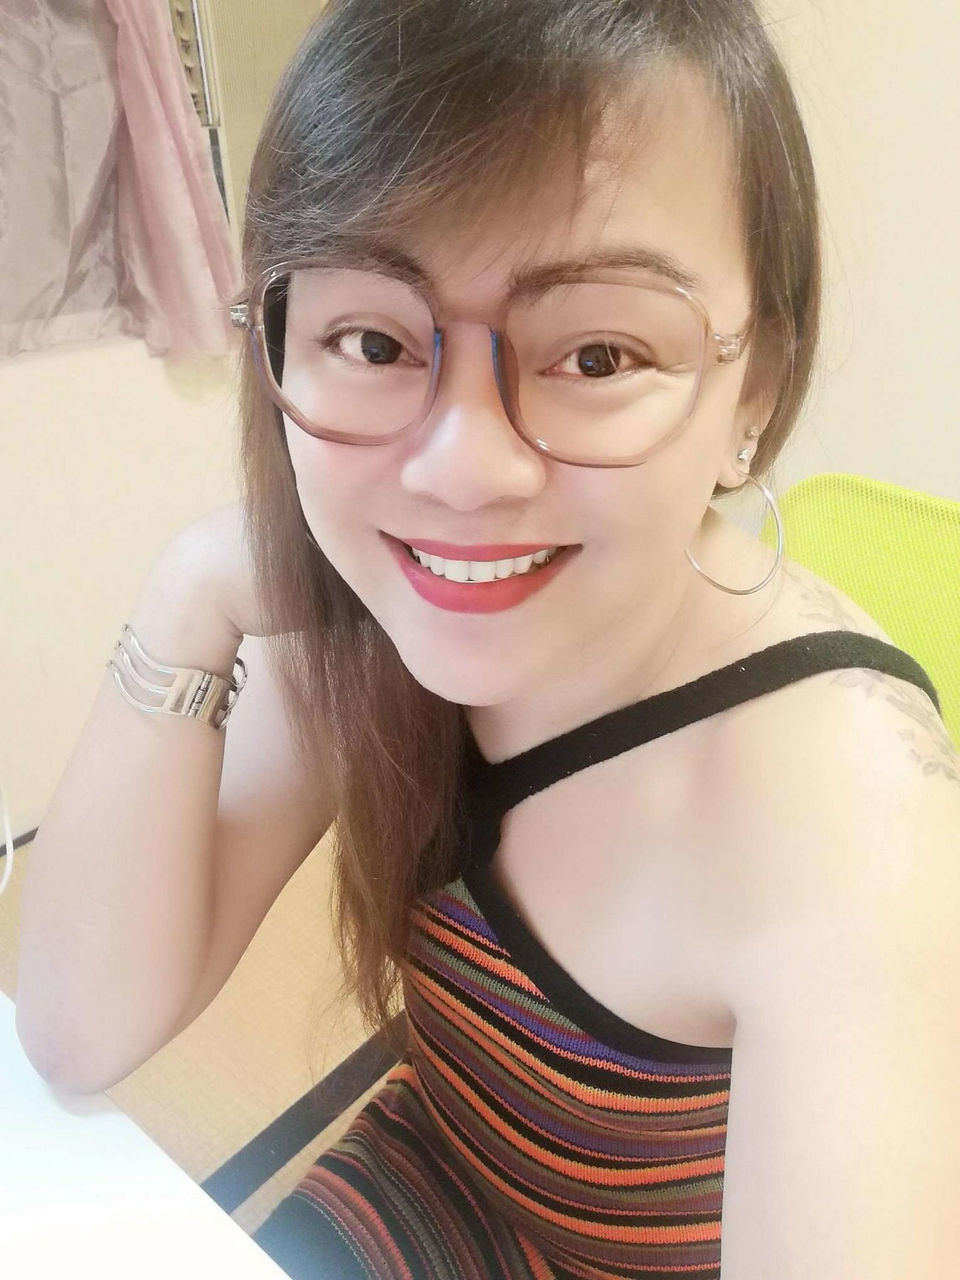 Escorts Makati City, Philippines YourChubbyTop(available4camshow)